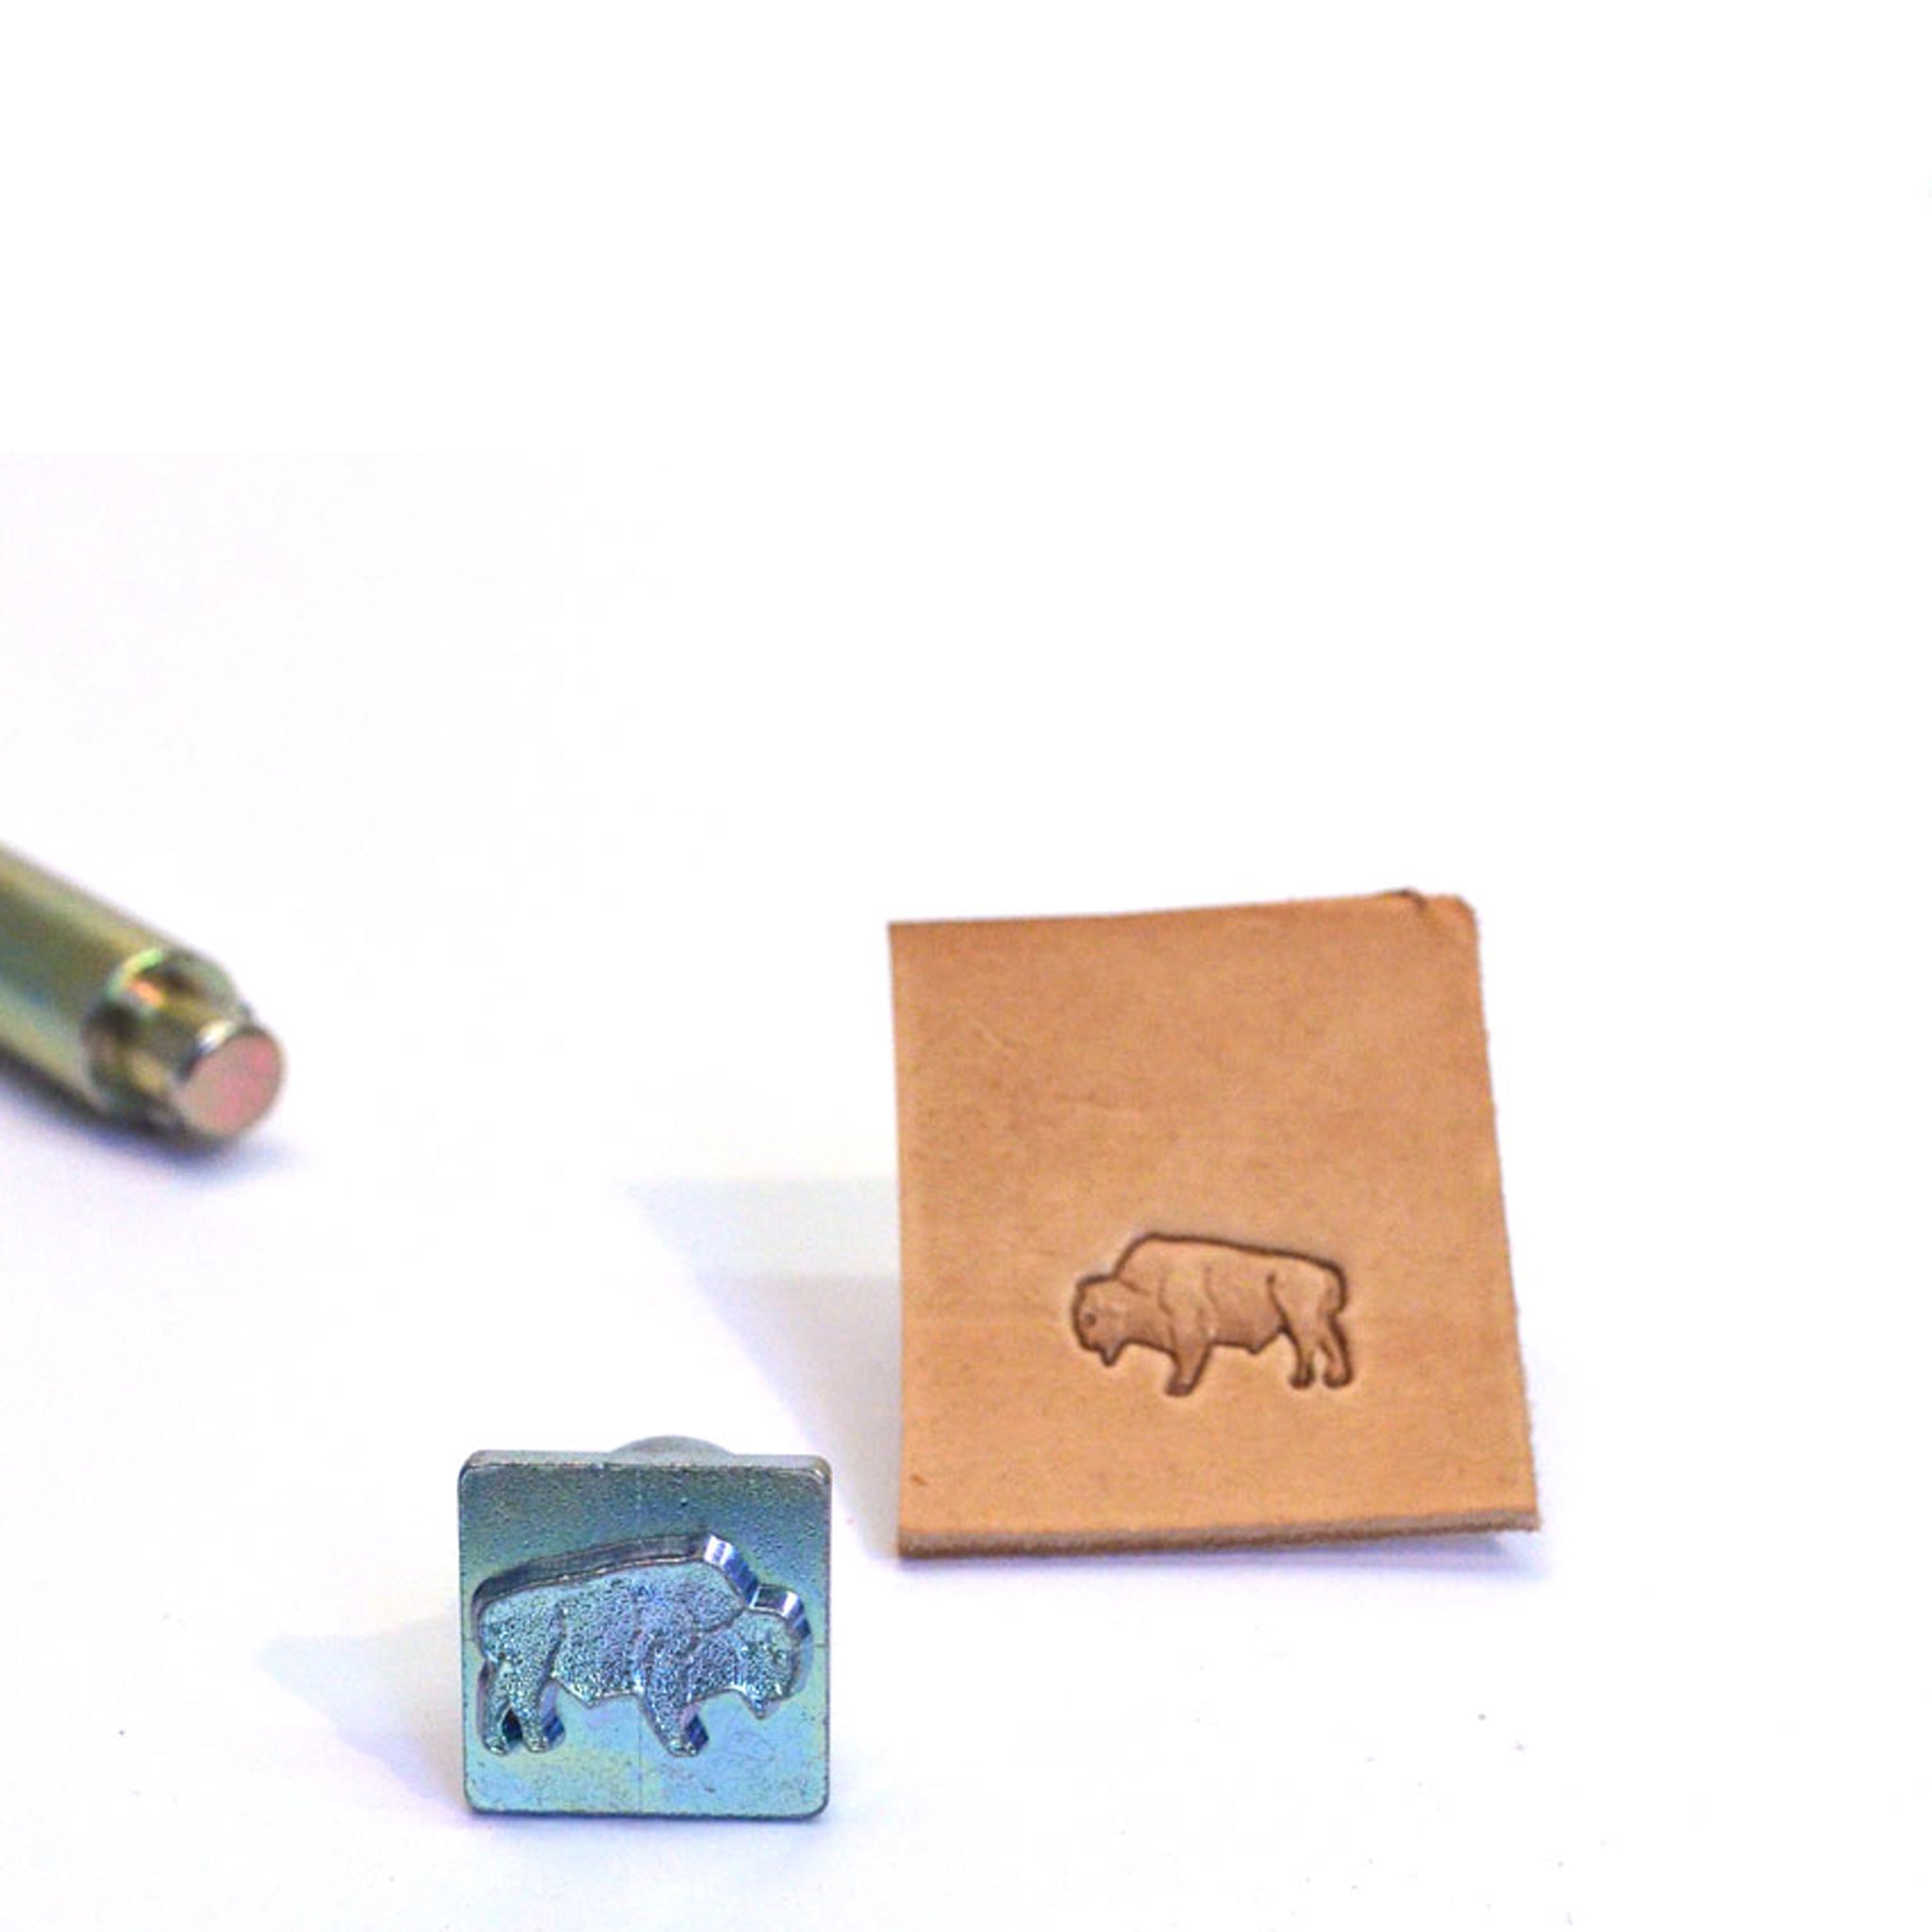 Buffalo (Bison) Mini 3D Embossing Stamp from Identity Leathercraft